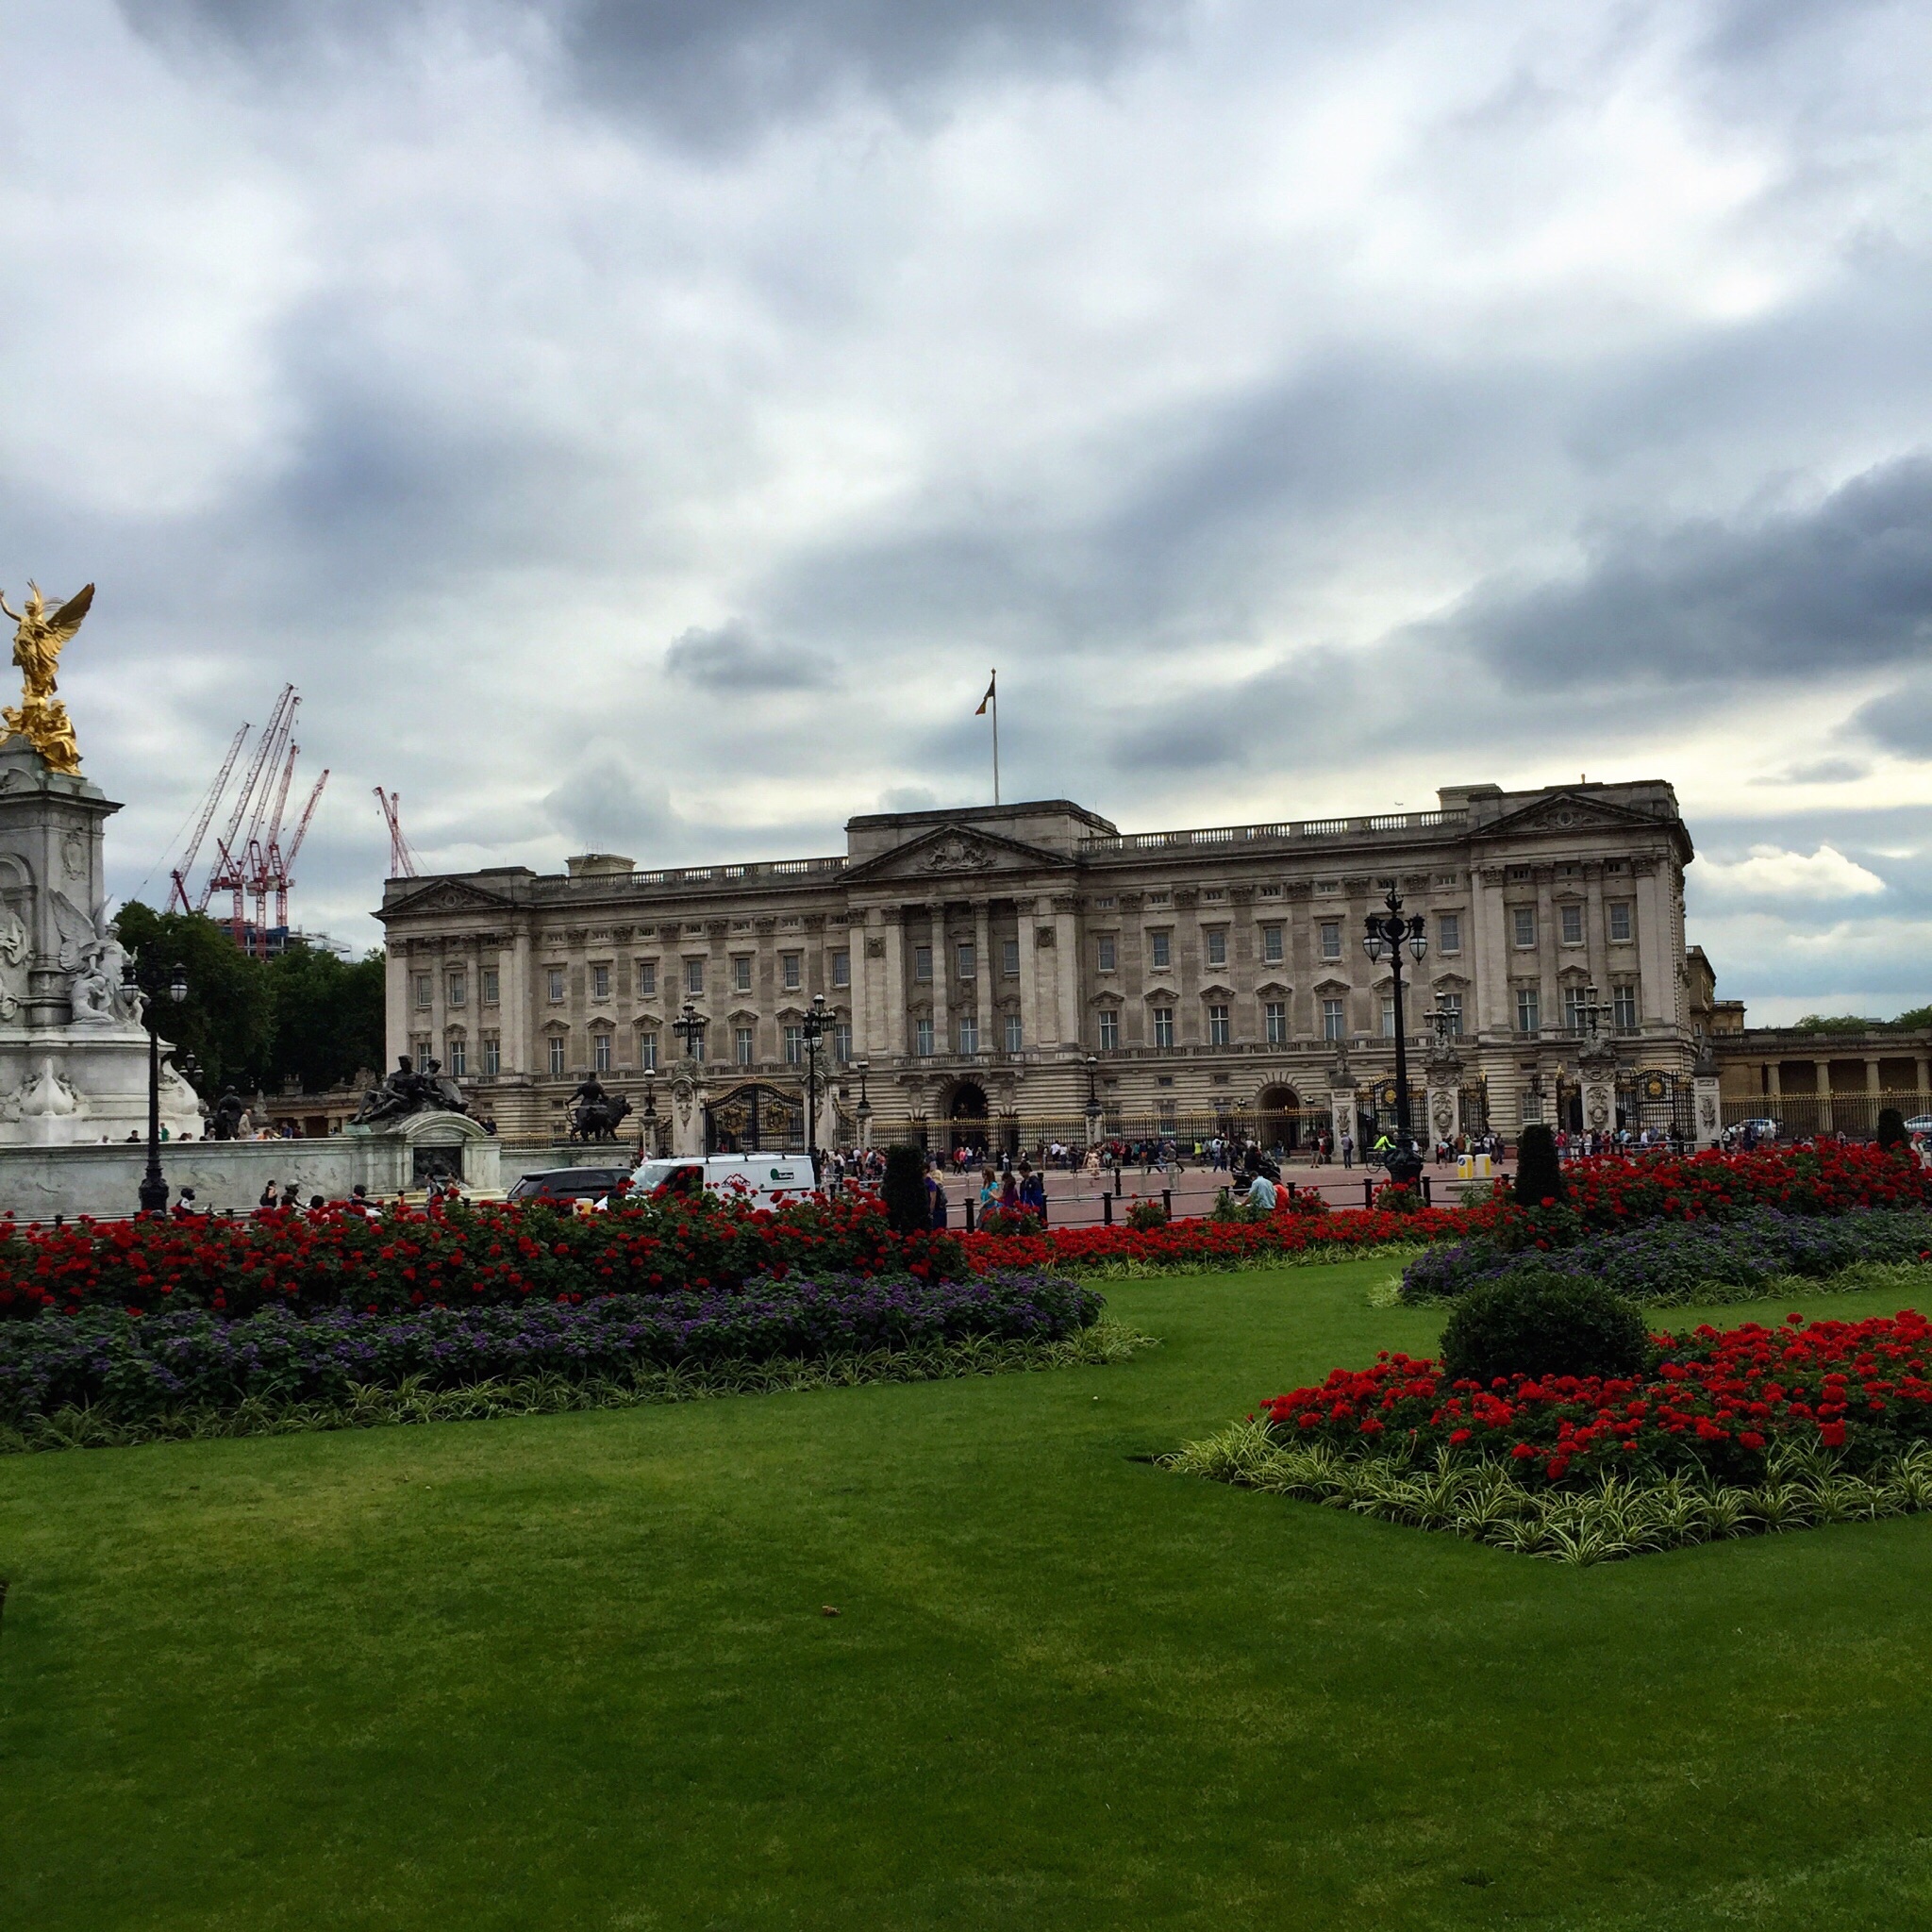 Moody palace sky and gorgeous gardens